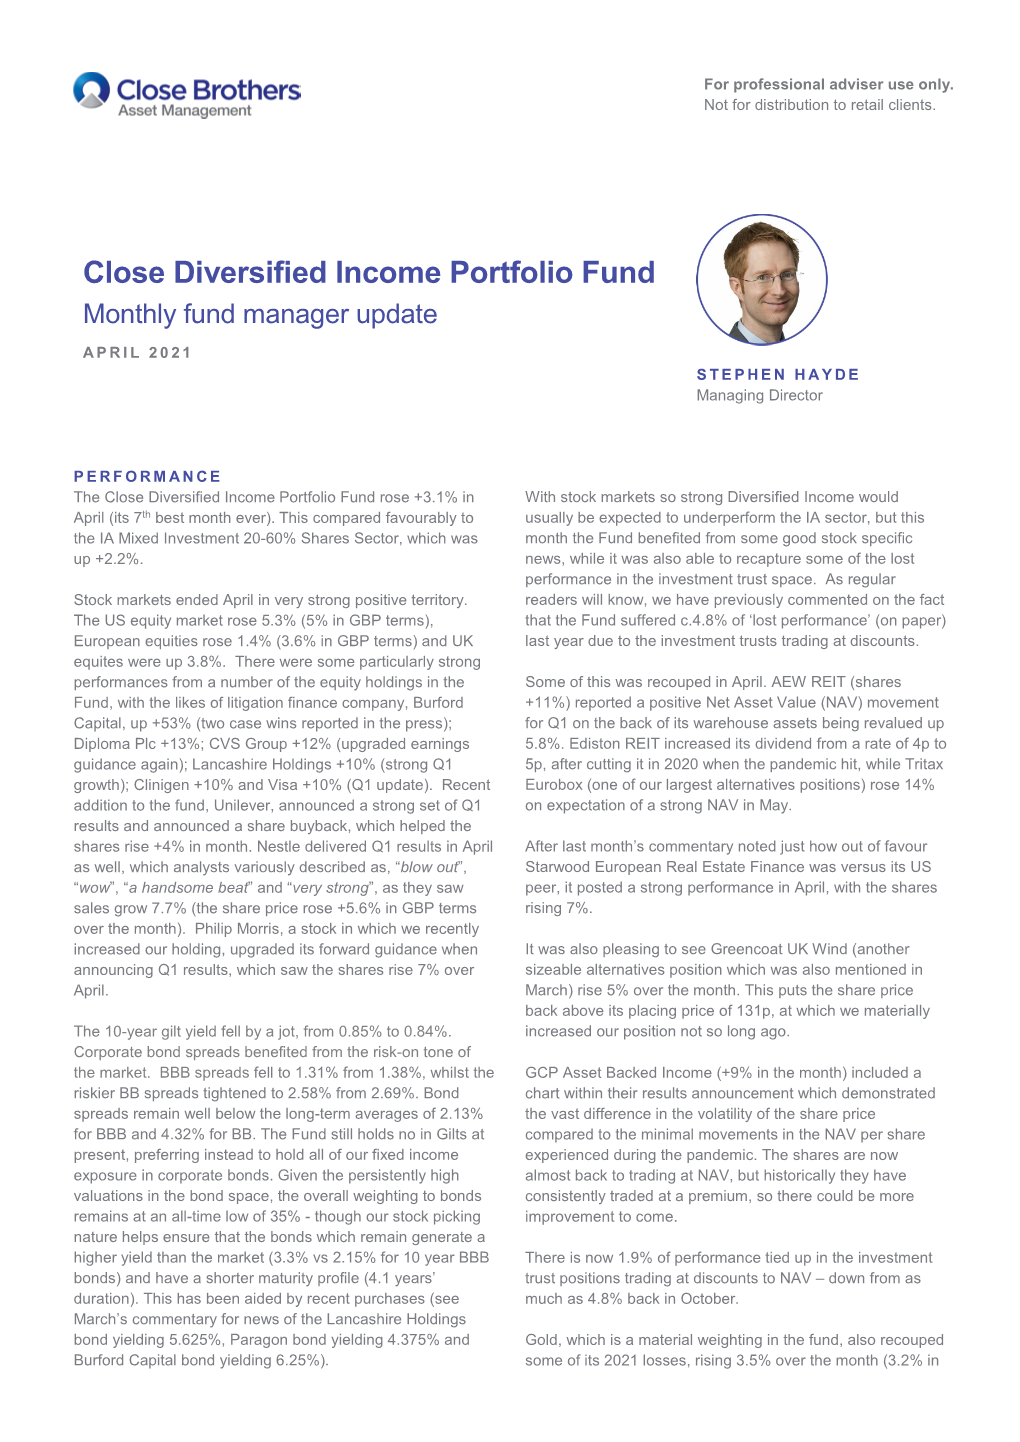 Close Diversified Income Portfolio Fund Monthly Fund Manager Update